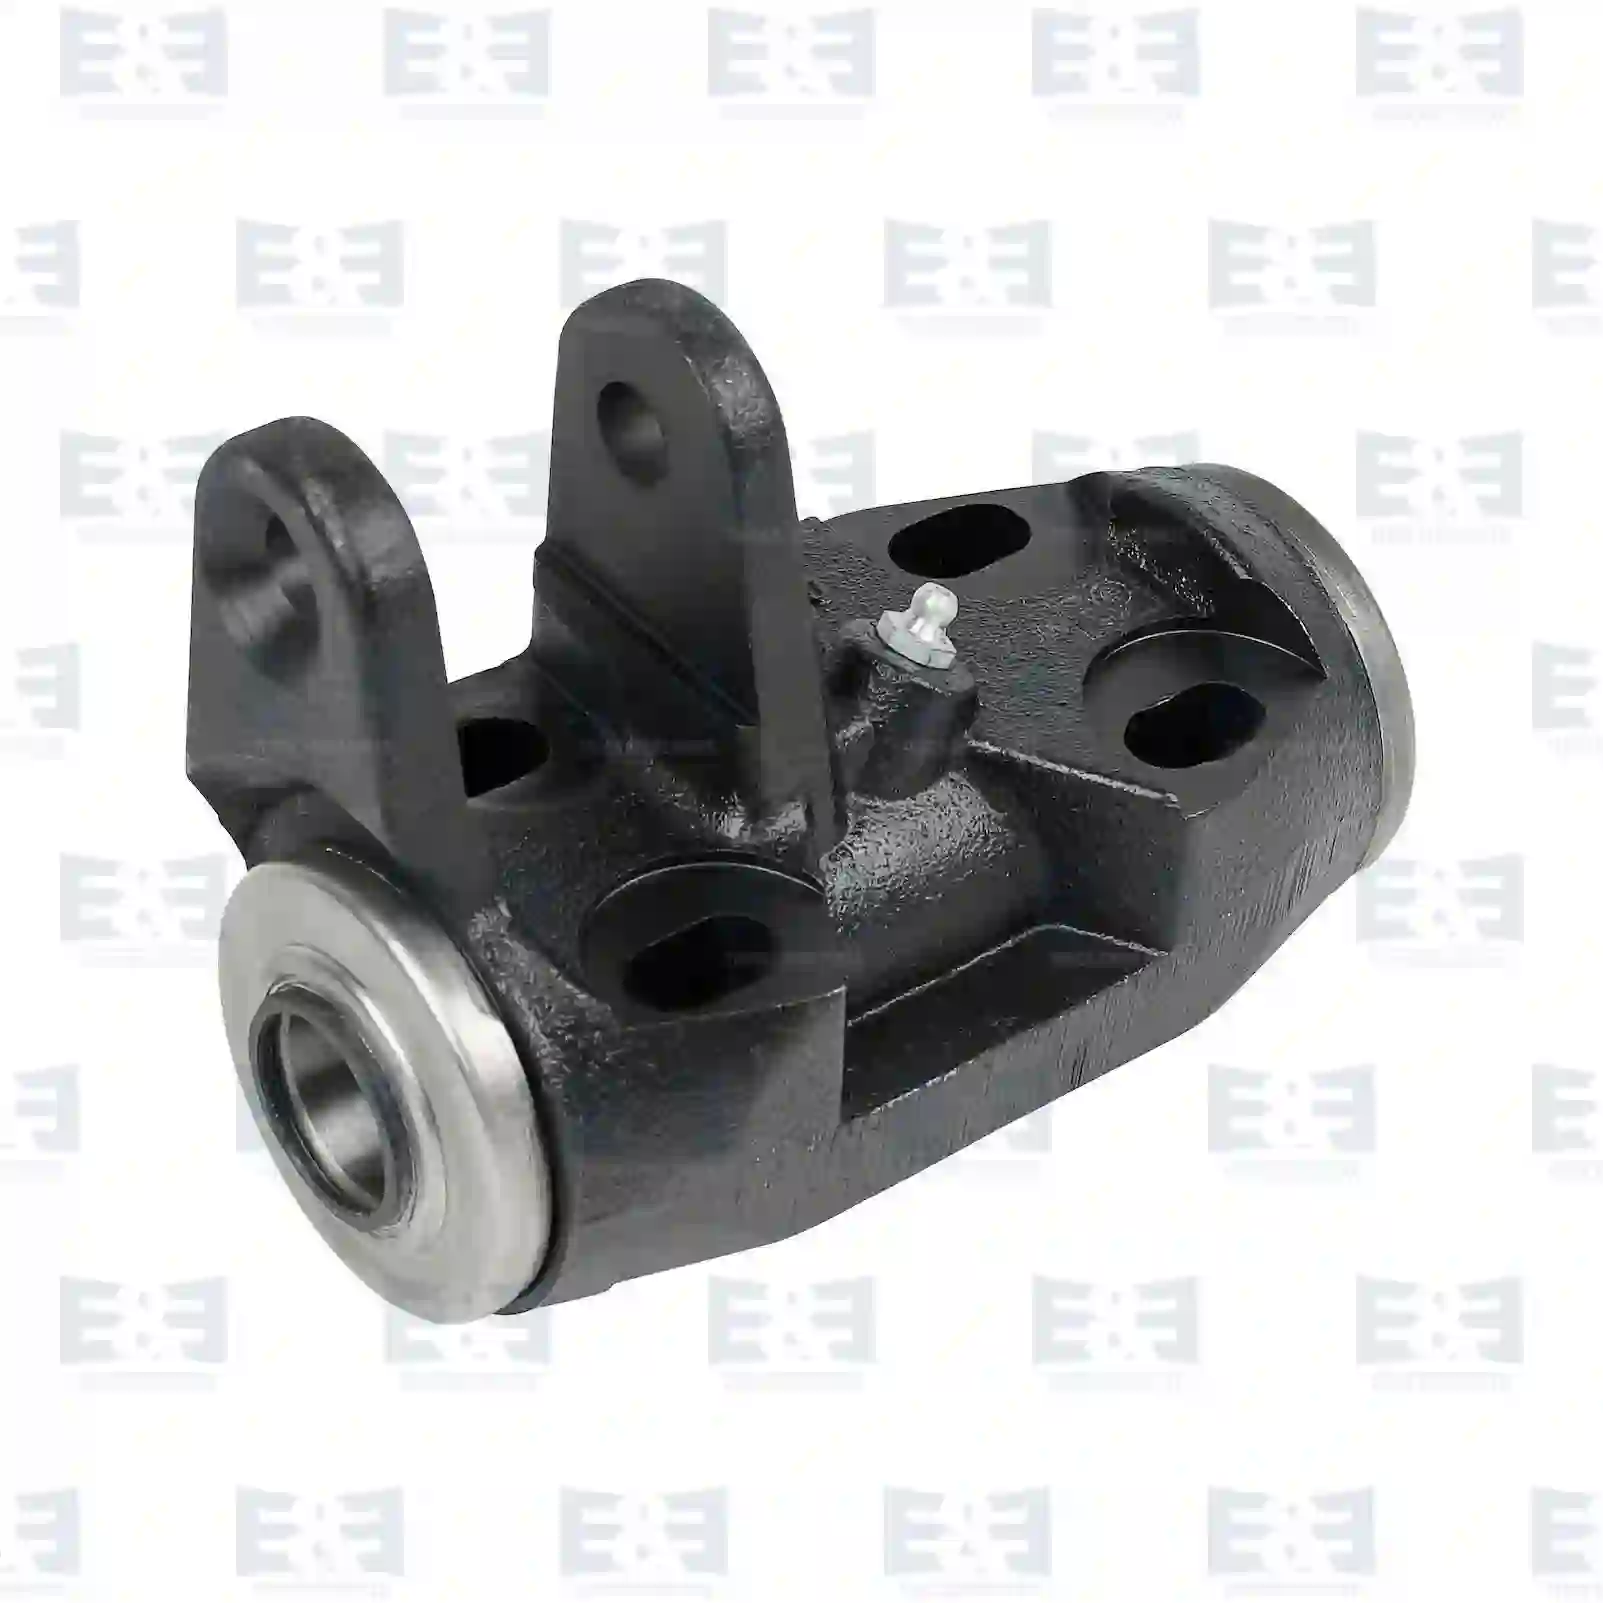 Bracket, right, with conical bearing, 2E2275348, 1075223 ||  2E2275348 E&E Truck Spare Parts | Truck Spare Parts, Auotomotive Spare Parts Bracket, right, with conical bearing, 2E2275348, 1075223 ||  2E2275348 E&E Truck Spare Parts | Truck Spare Parts, Auotomotive Spare Parts